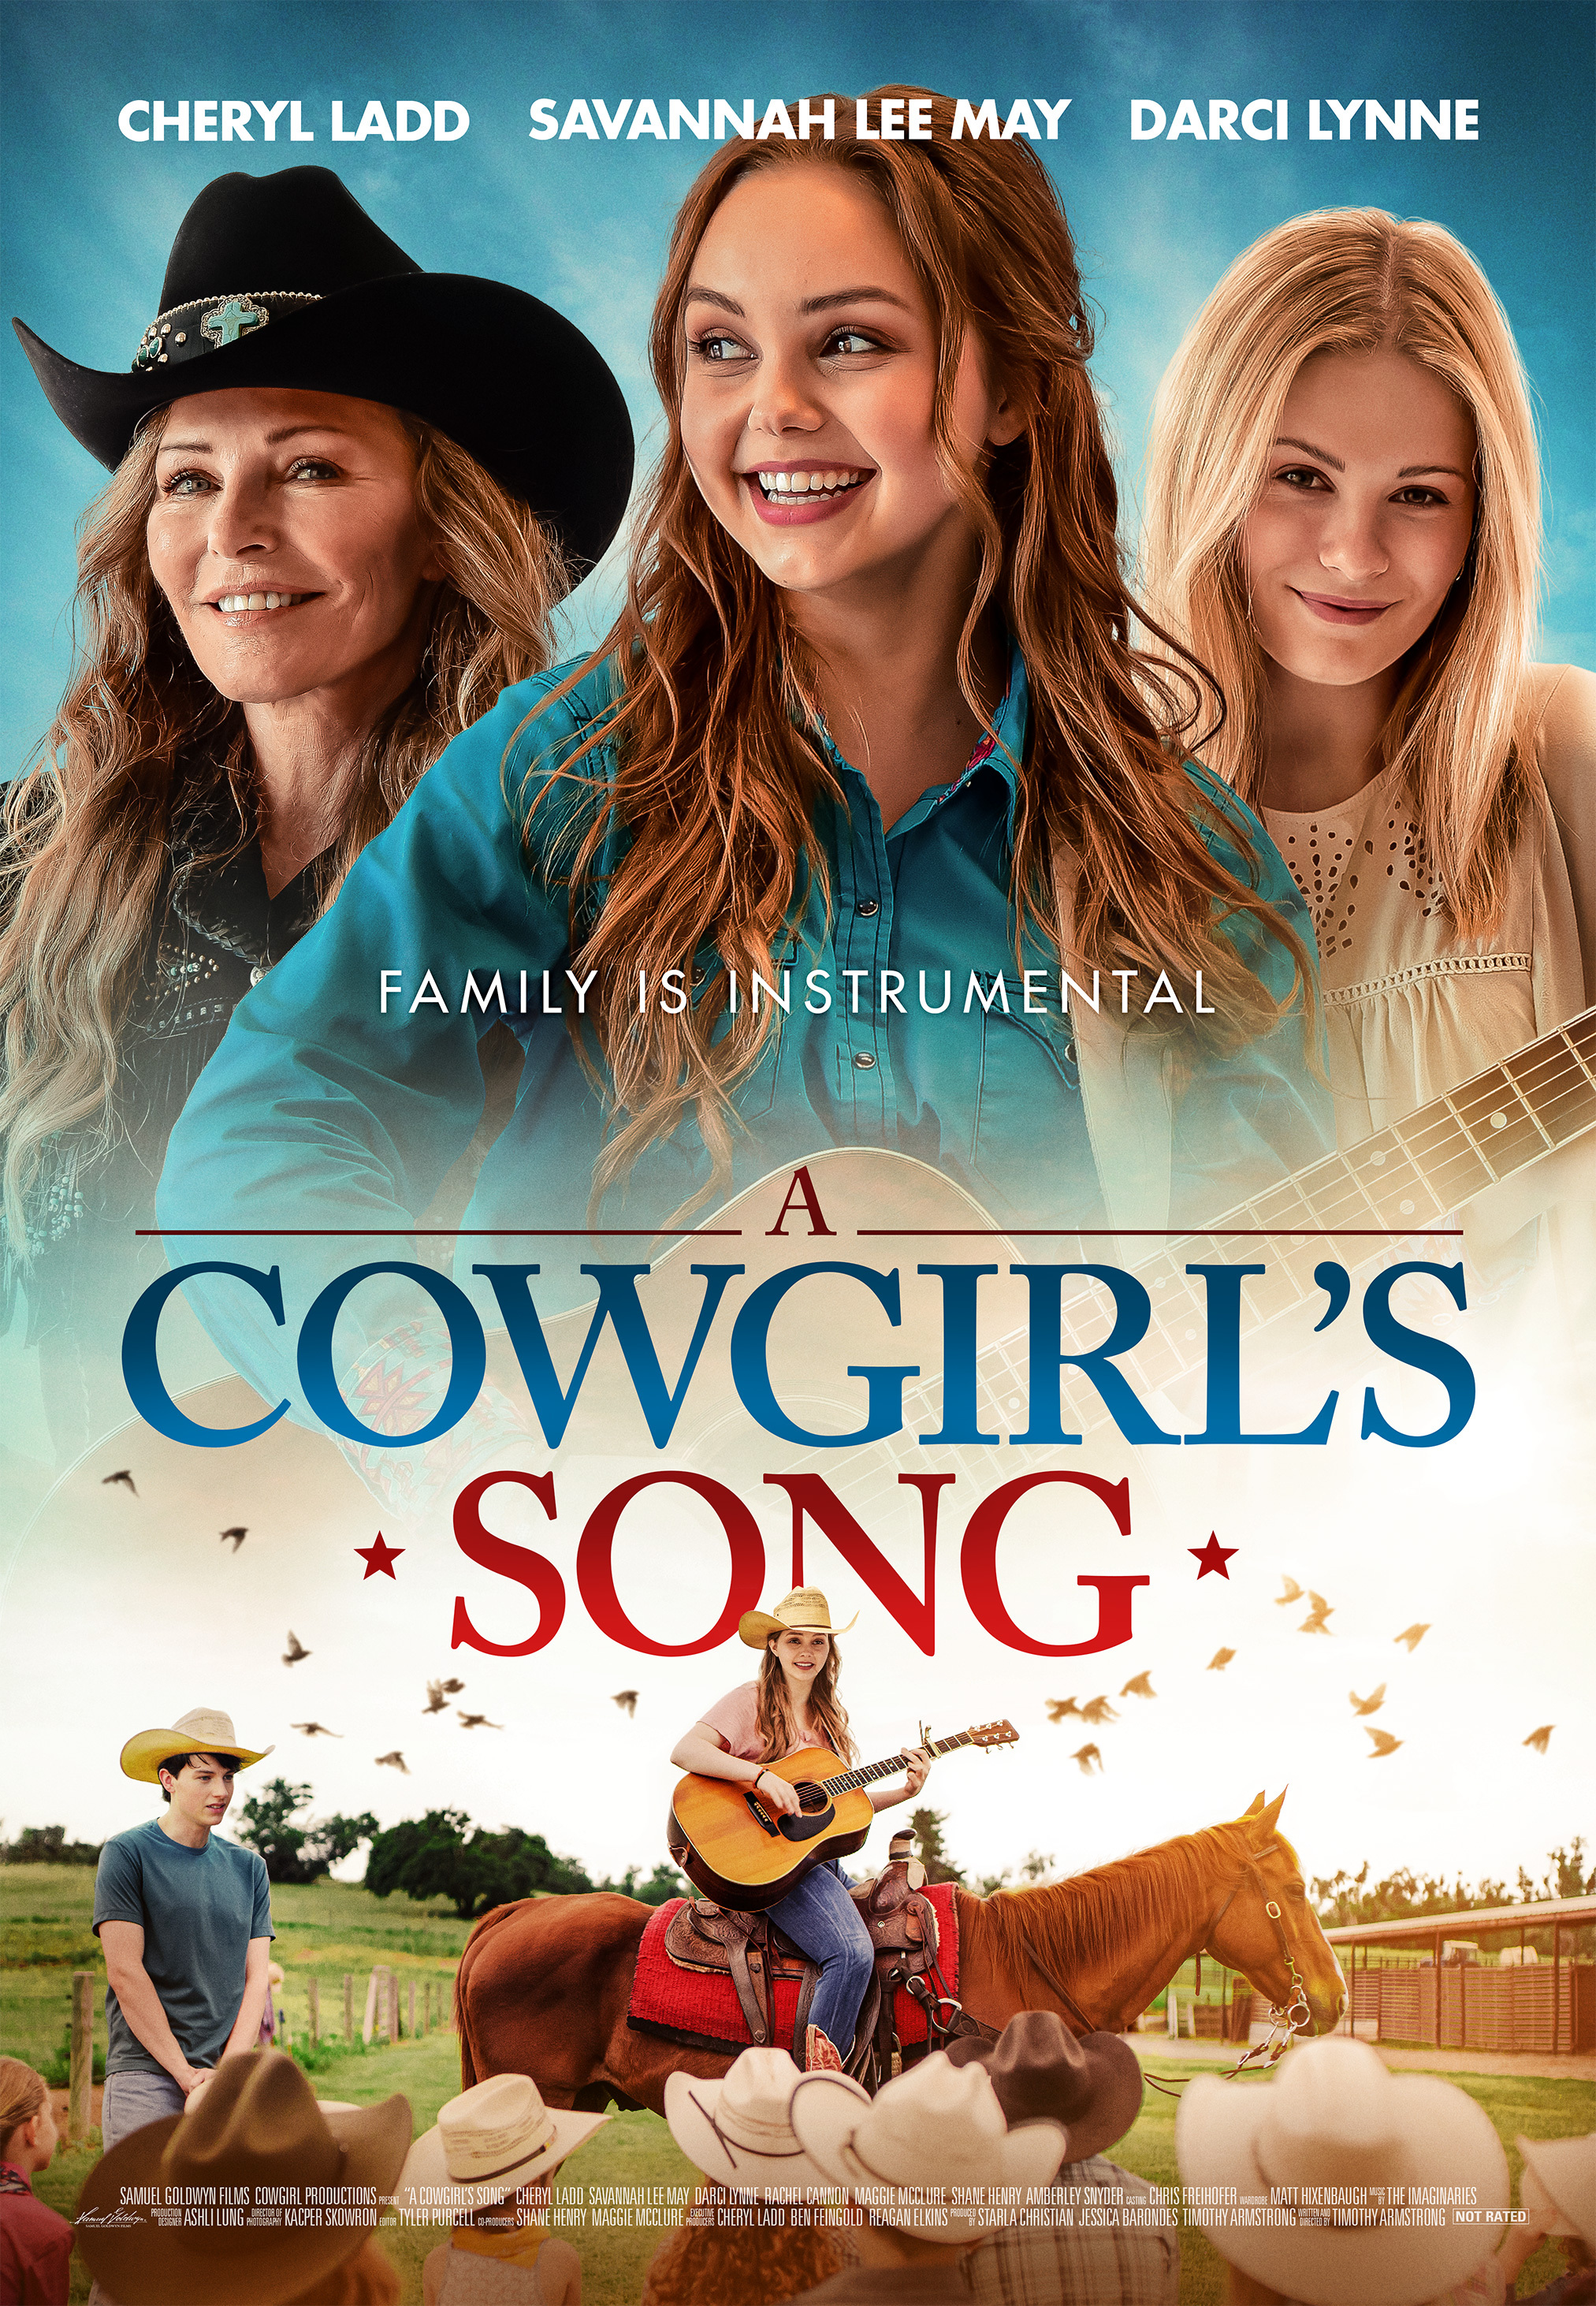 CowgirlsSong_THEATRICAL-proof.jpg#asset:164